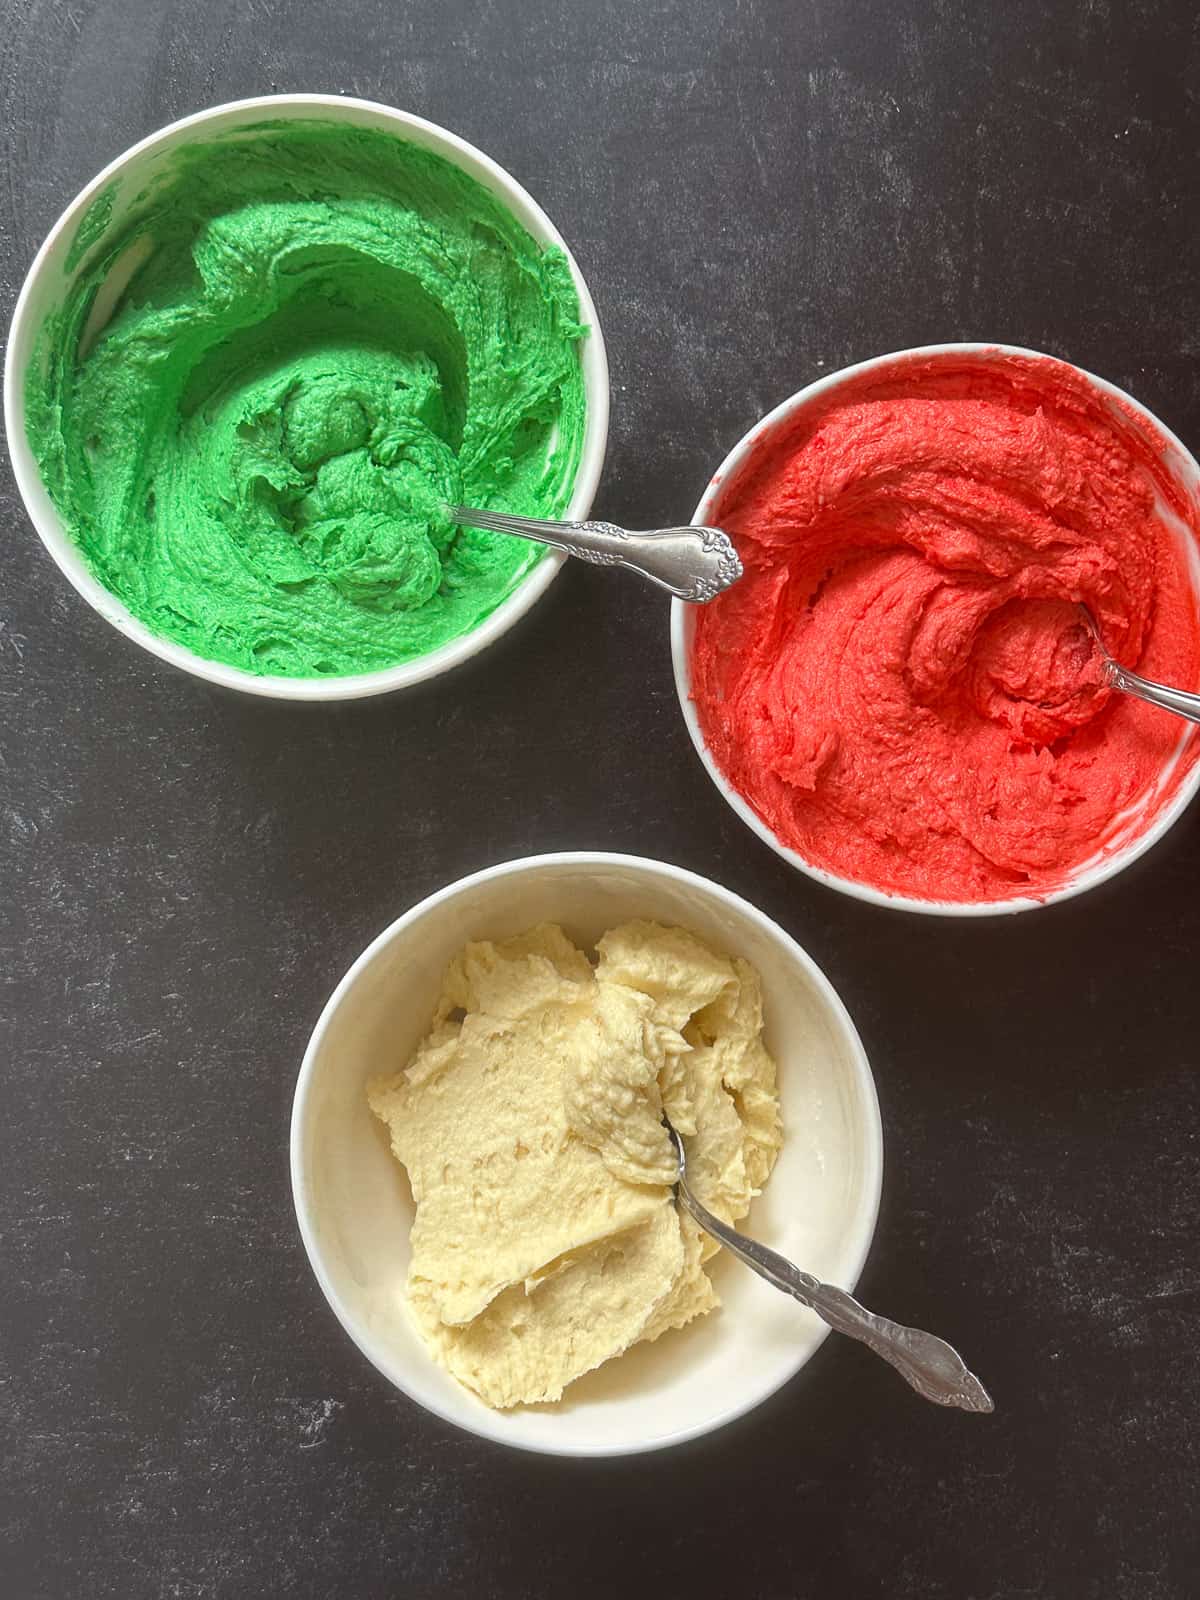 Three bowls of cake batter in green, white, and red.